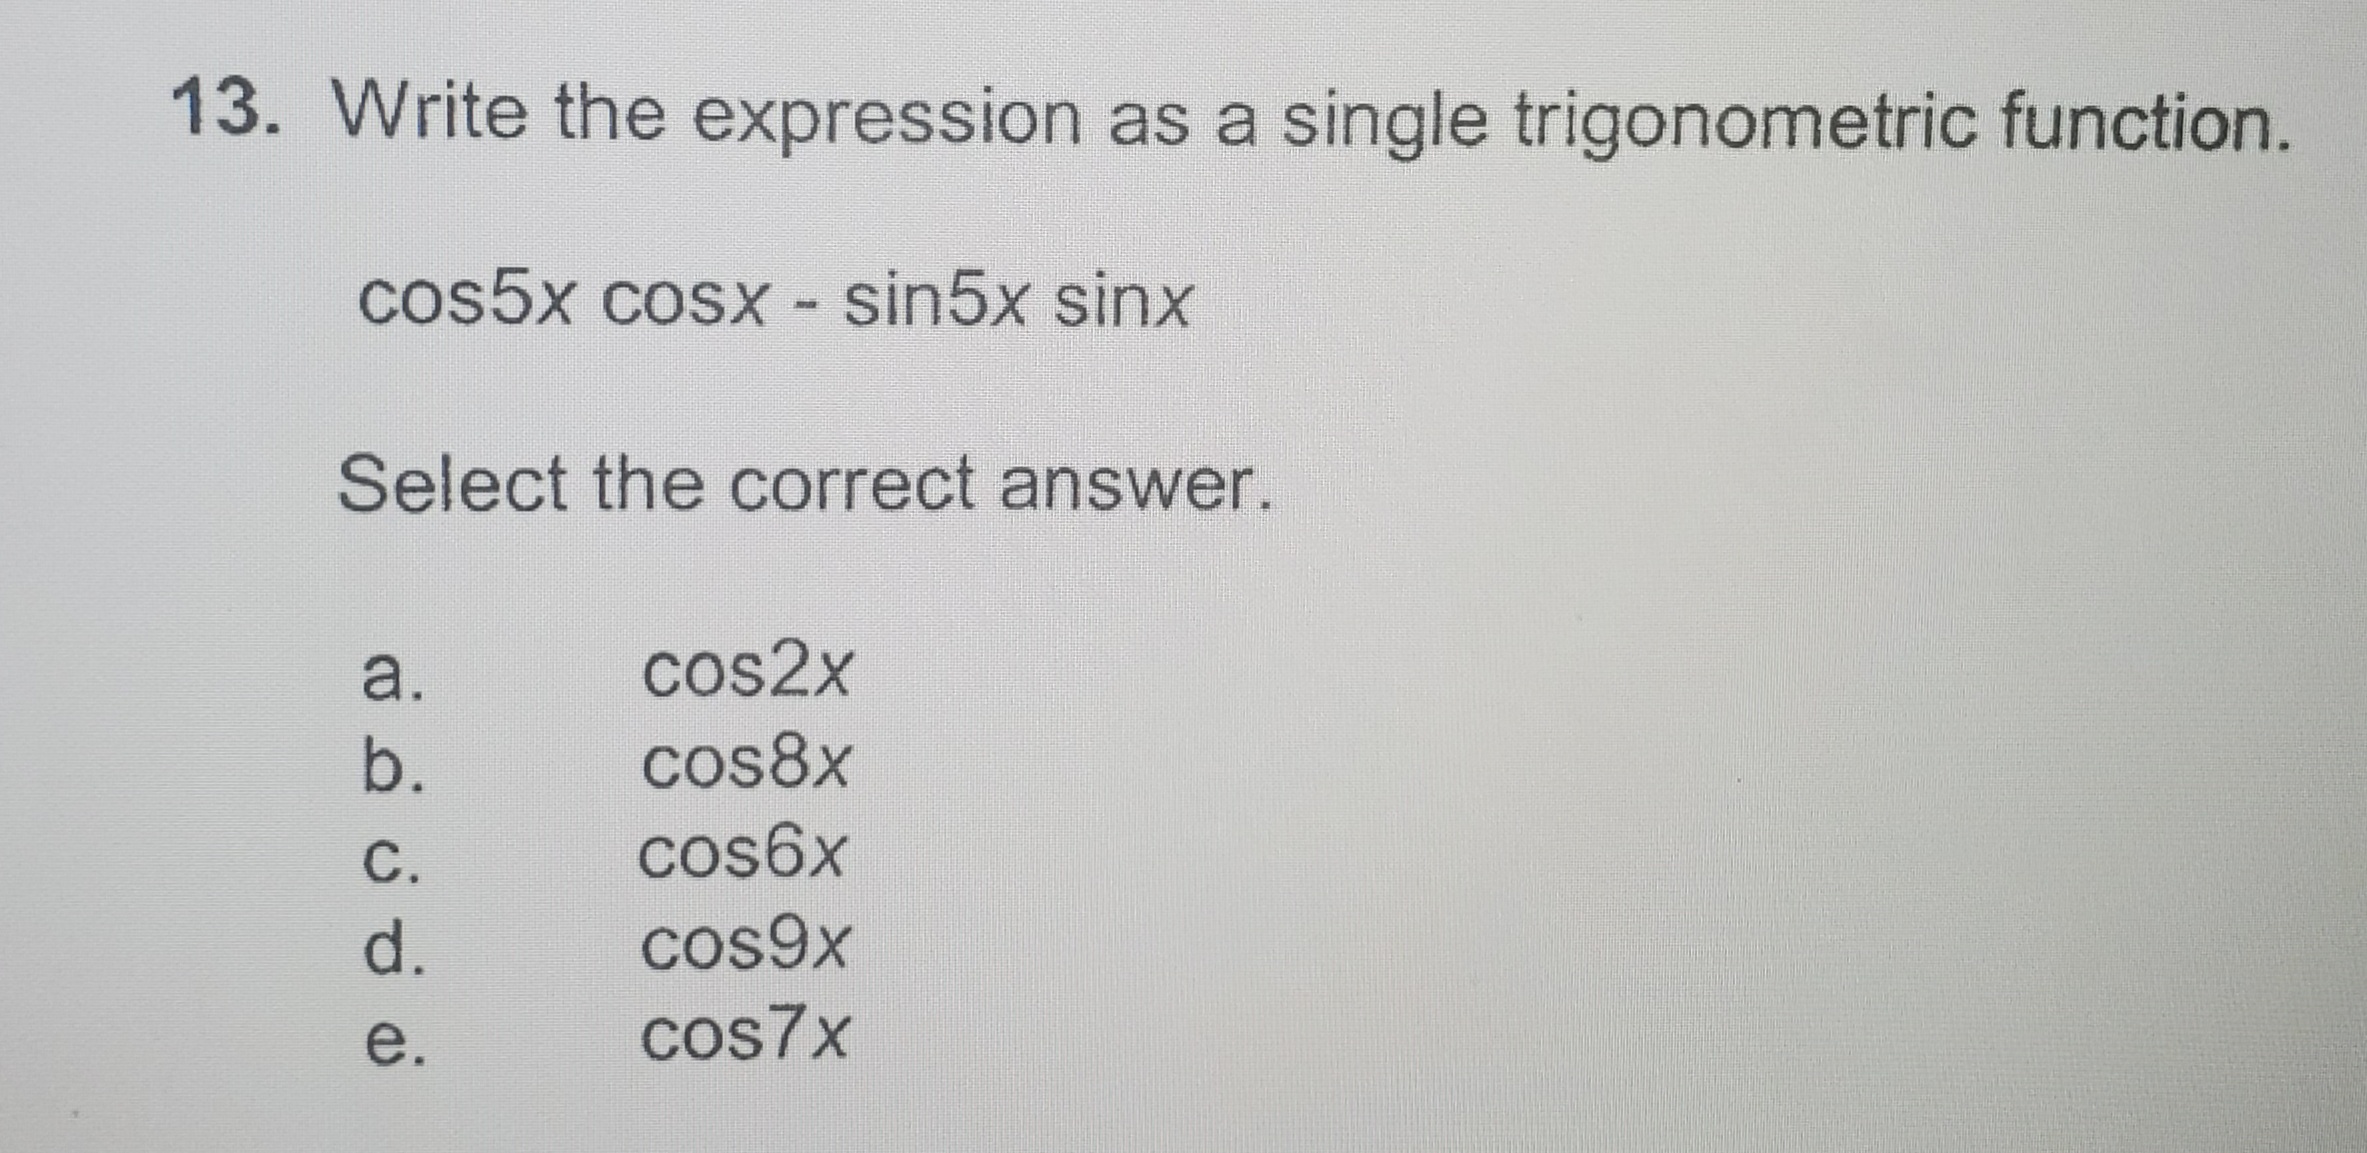 13. Write the expression as a single trigonometric function.
cos5x cosx - sin5x sinx
Select the correct answer.
a.
cos2x
b.
cos8x
C.
cos6x
d.
cos9x
e.
cos7x
